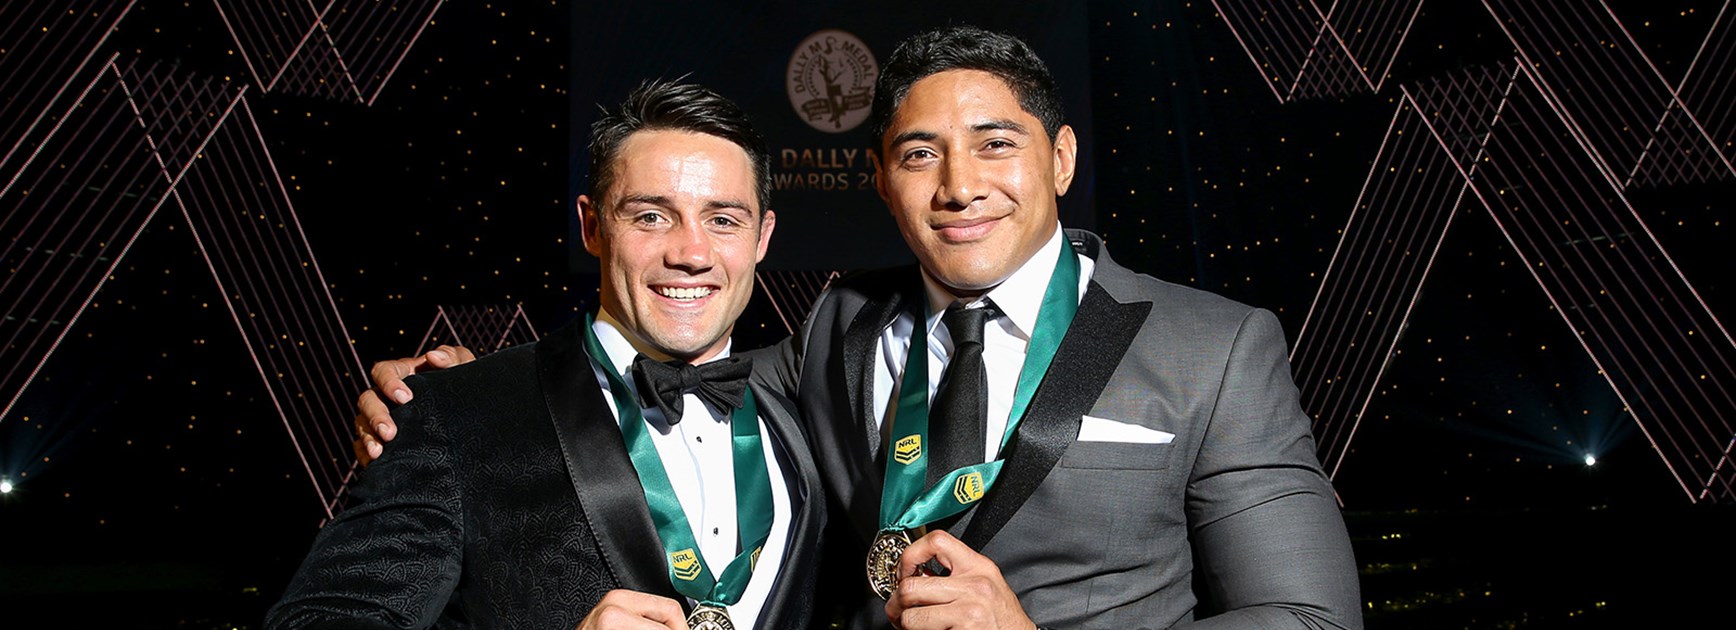 Storm halfback Cooper Cronk and Cowboys lock Jason Taumalolo were joint winners of the Dally M Medal.